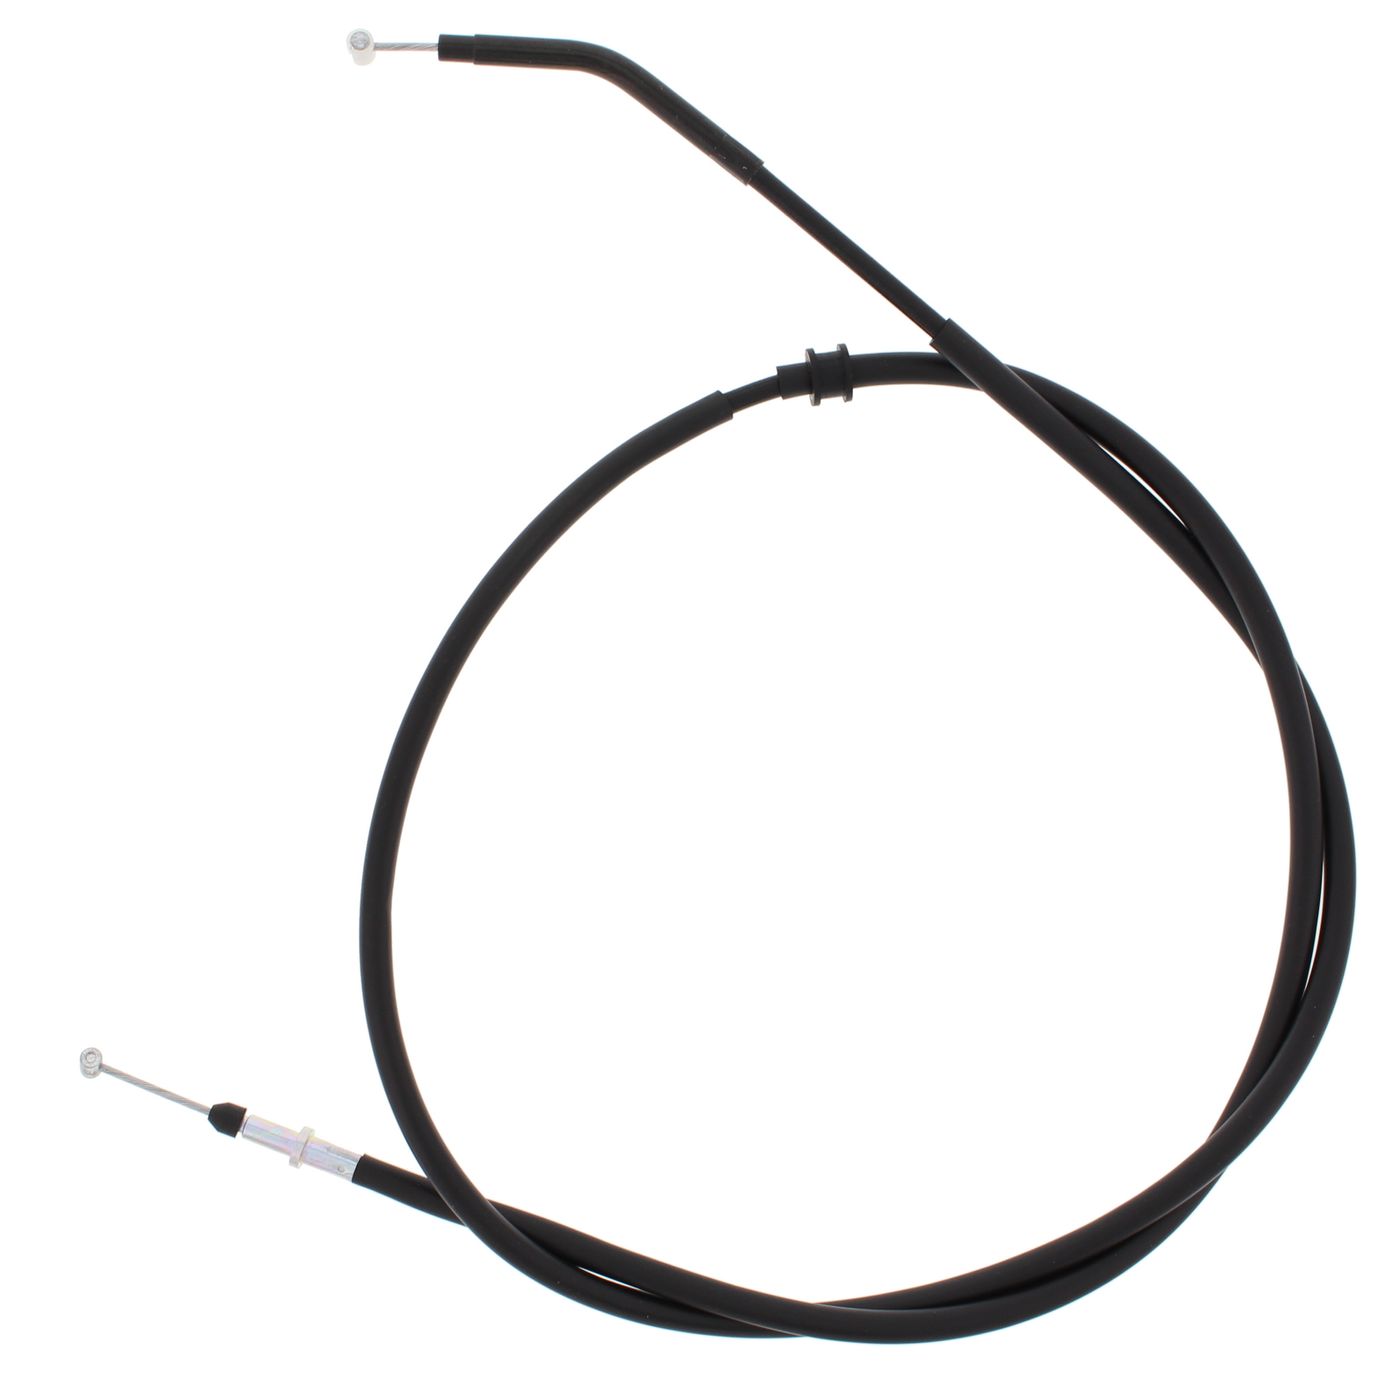 Wrp Brake Cables - WRP454035 image